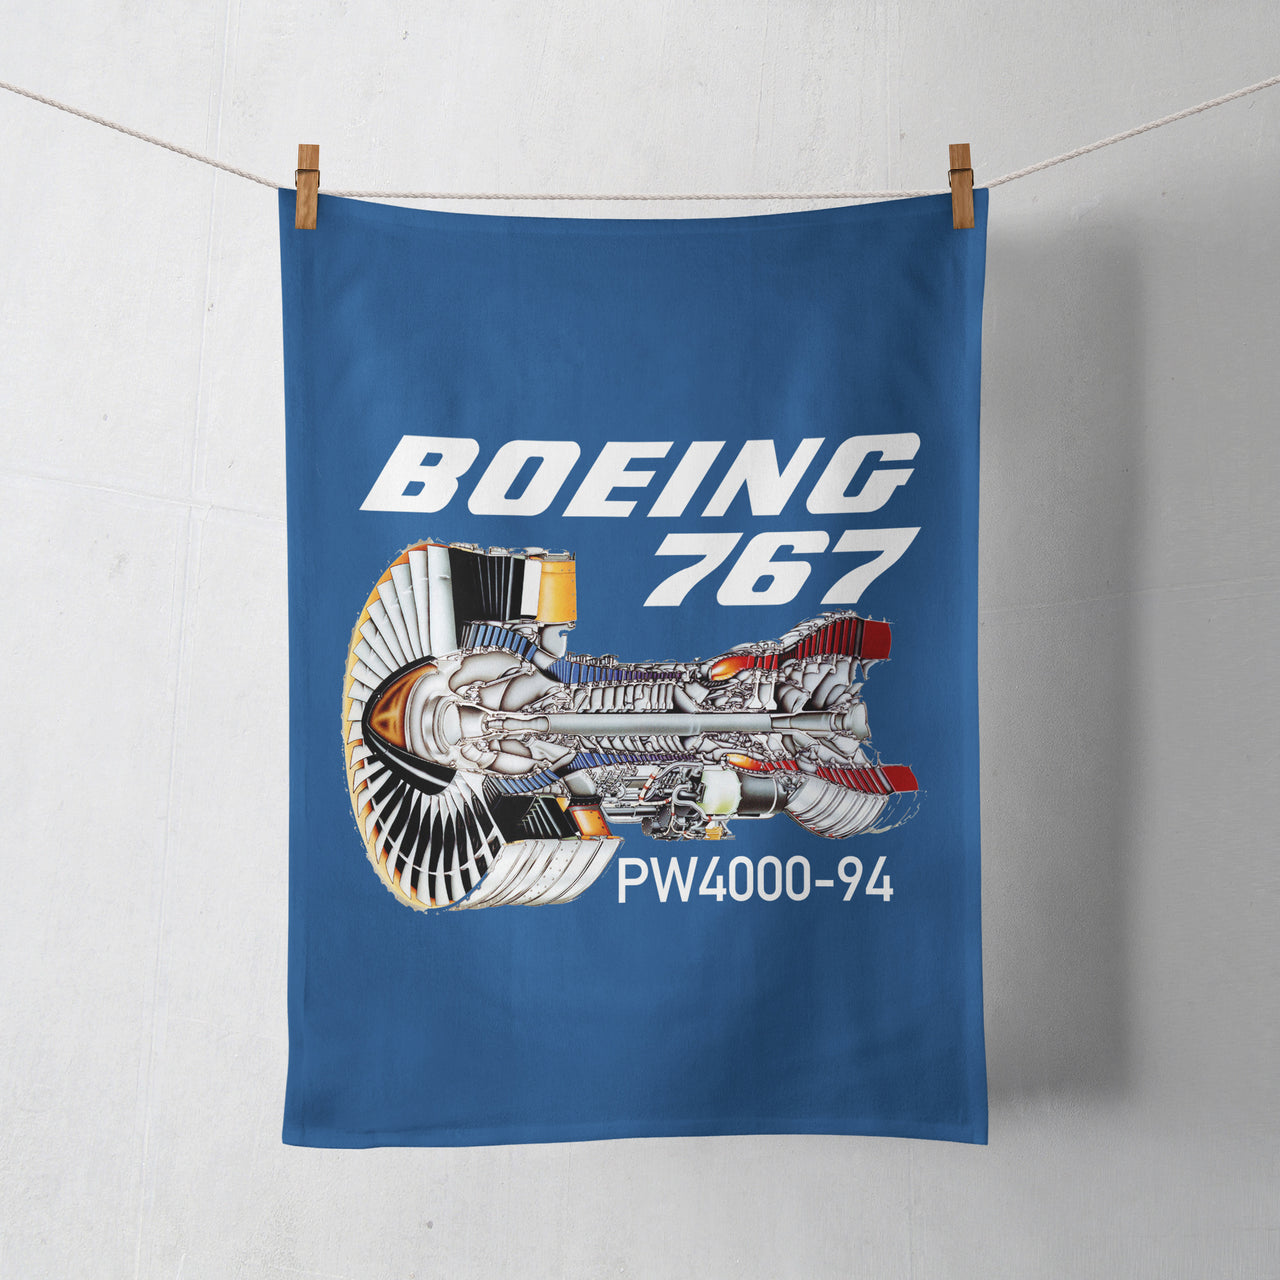 Boeing 767 Engine (PW4000-94) Designed Towels